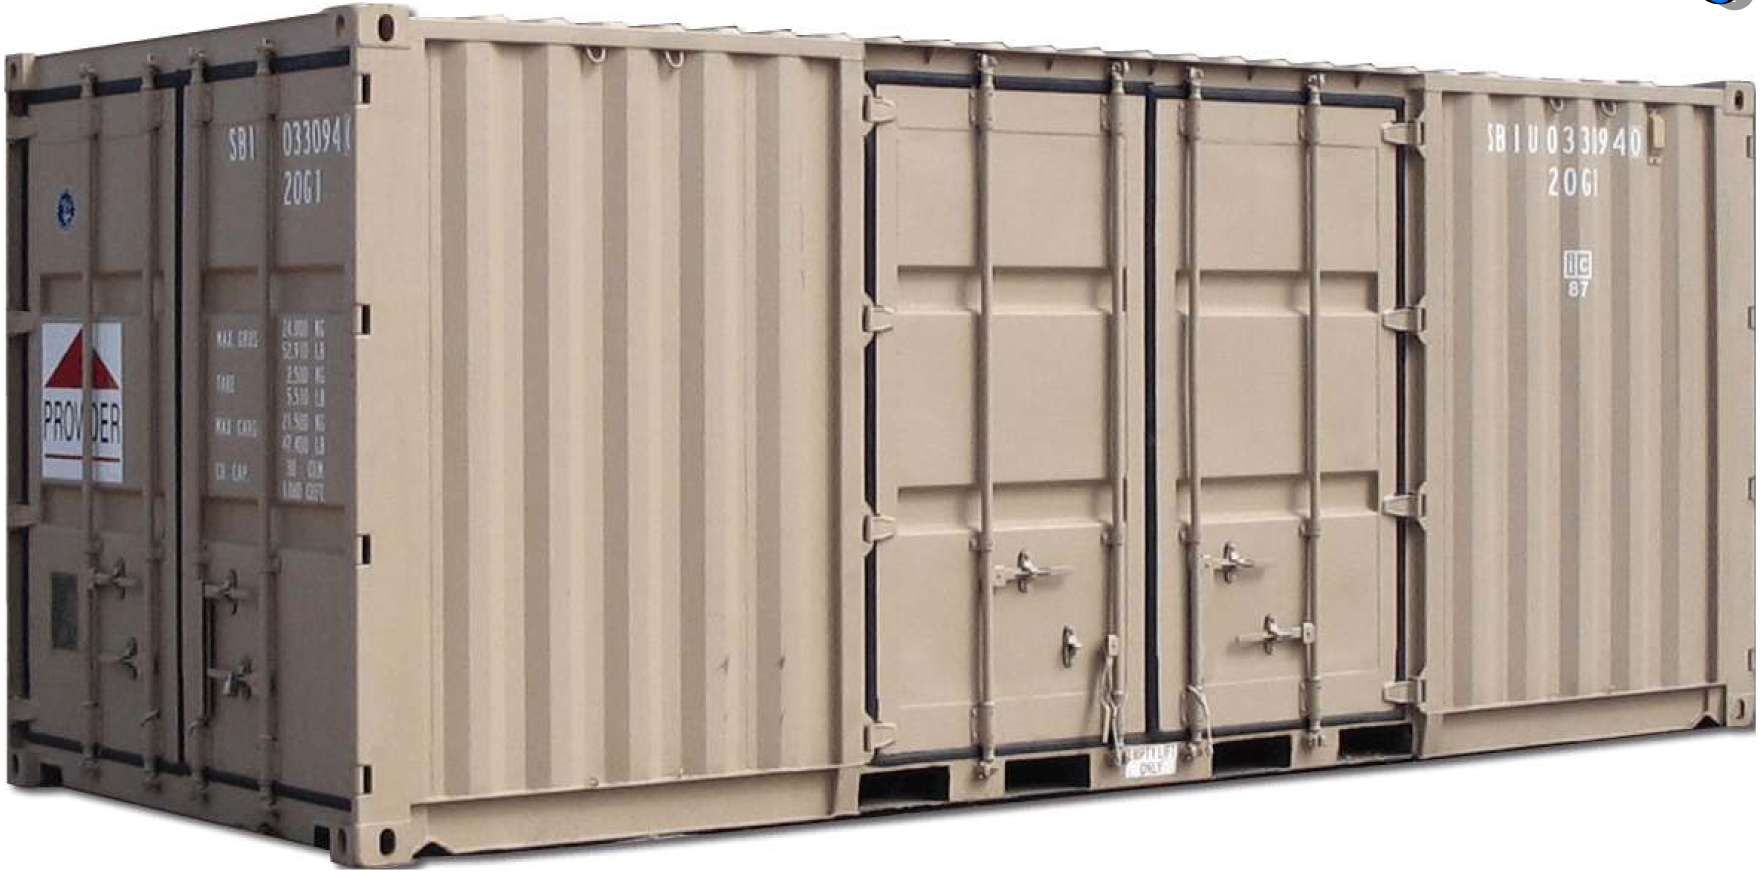 20’ x 8’6” Dry Freight ISO Container with Double Doors Both Ends and One Side